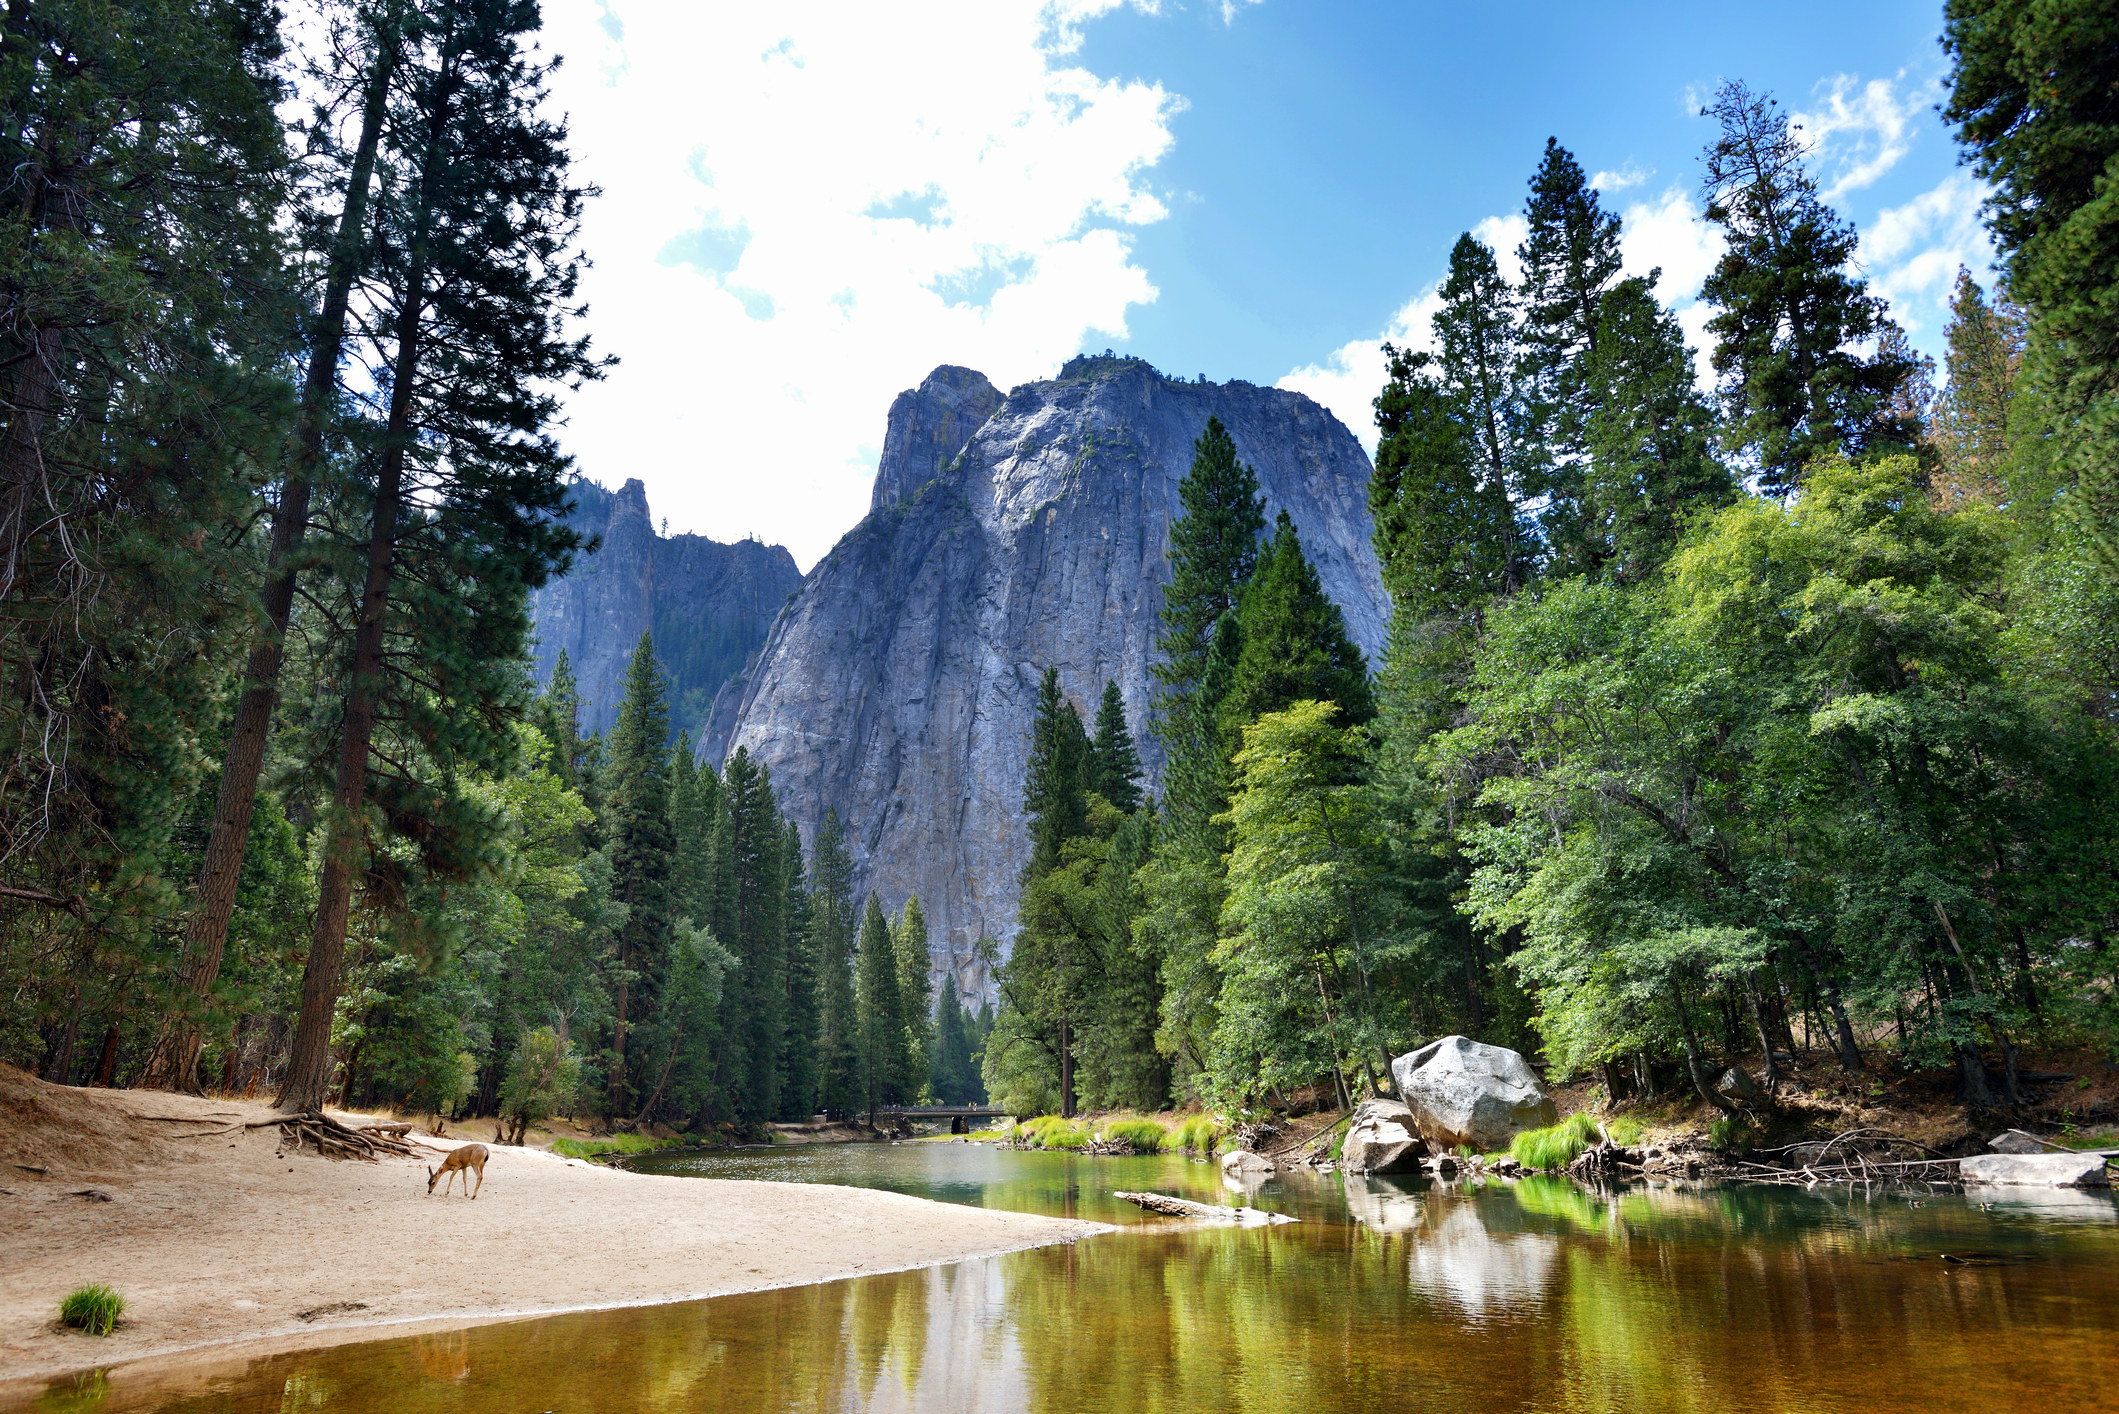 Majestic trees and mountains at Yosemite National Park